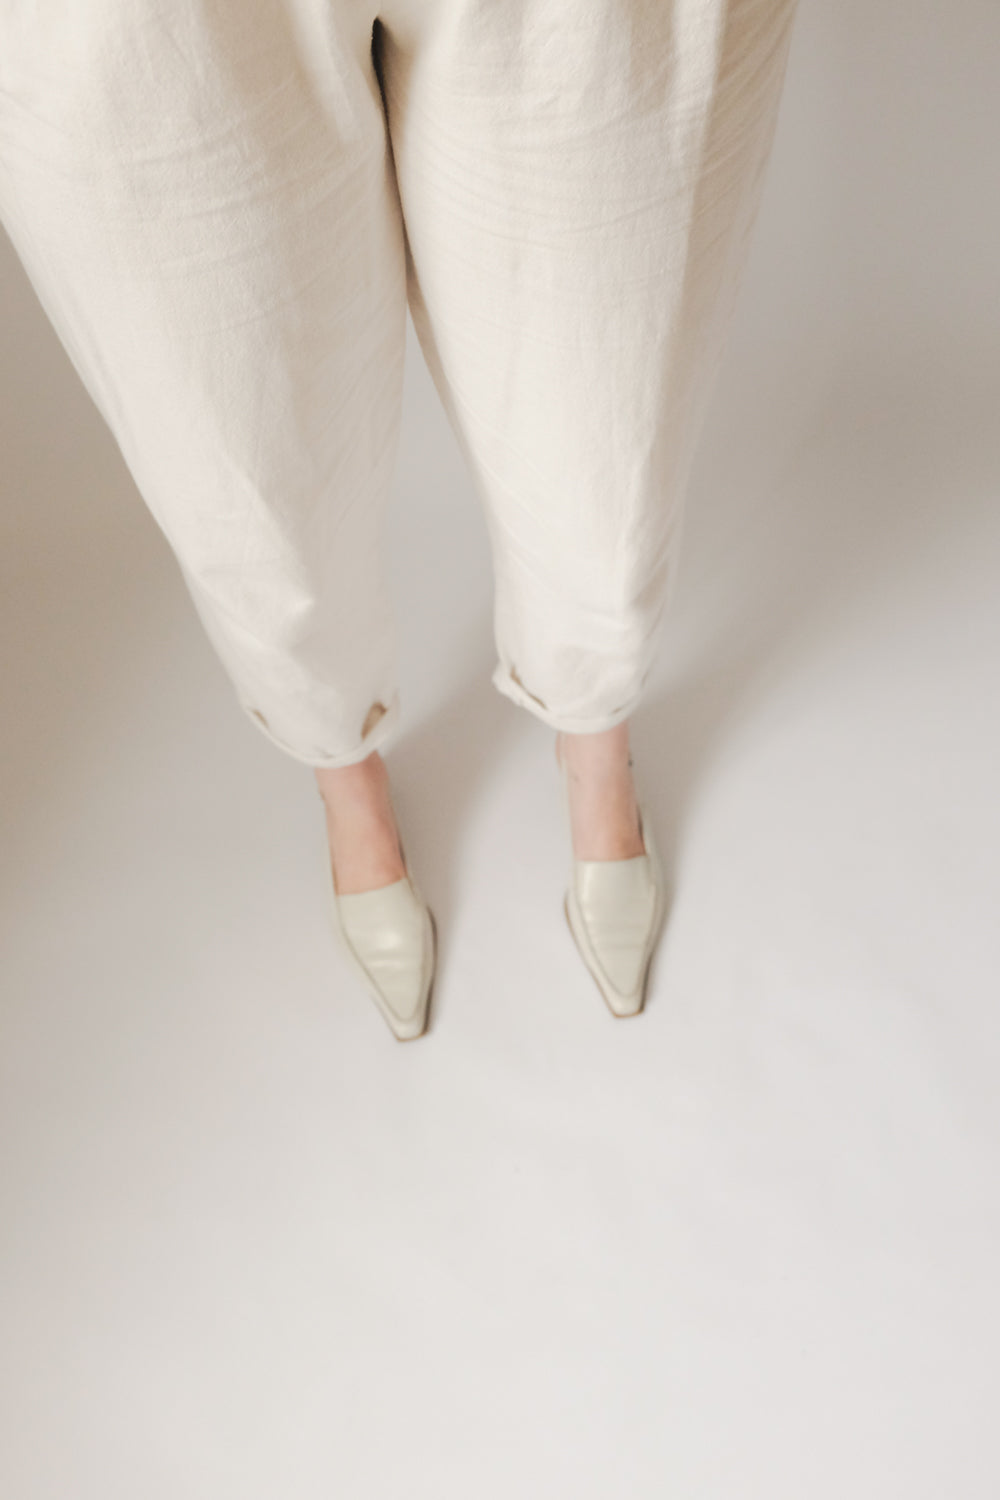 POINTY CREAM SLING BACK MULES 39 40